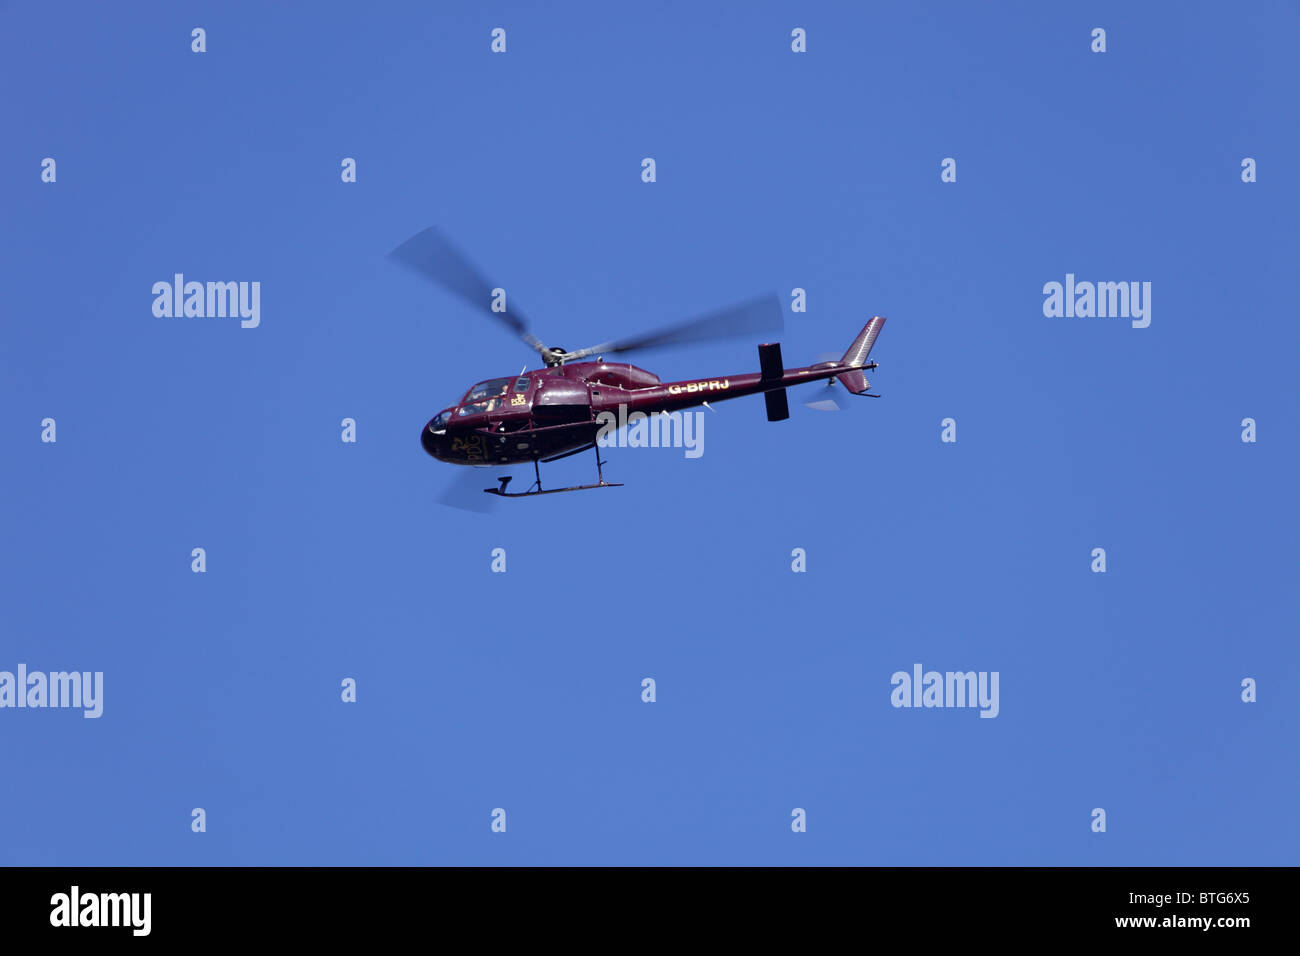 Aerospatiale AS355 twin squirrel 2 G-BPRJ operated by PDG Helicopters in flight Stock Photo